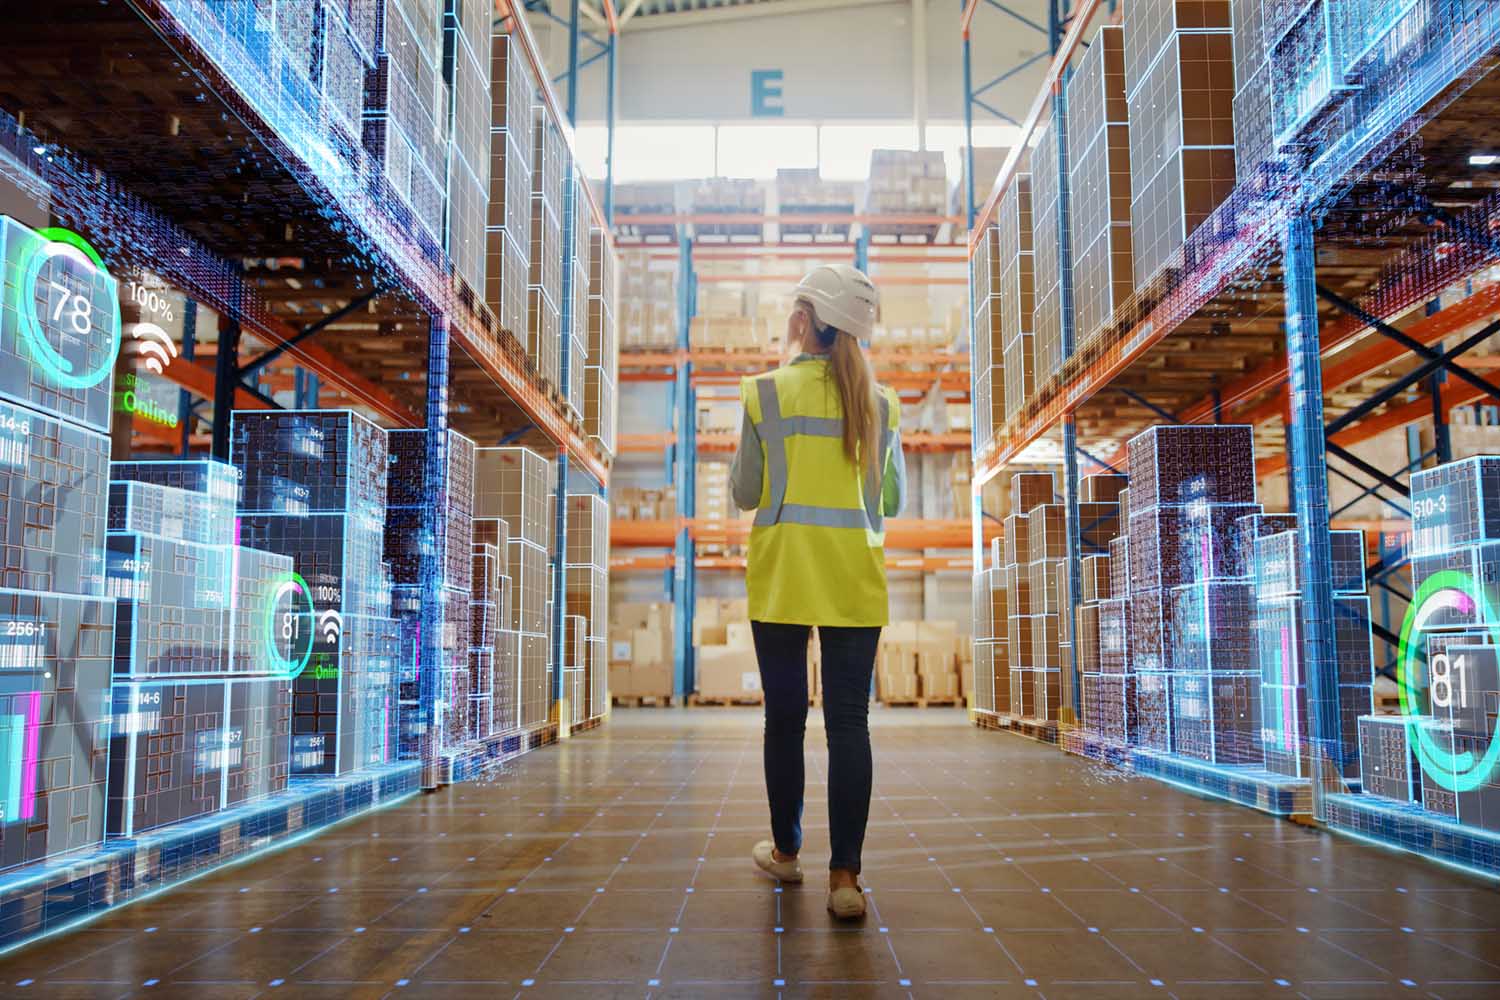 Photo of a woman wearing a hard hat and safety vest walking in an aisle of a warehouse. The inventory in the warehouse is overlaid with graphics depicting inventory management apps.